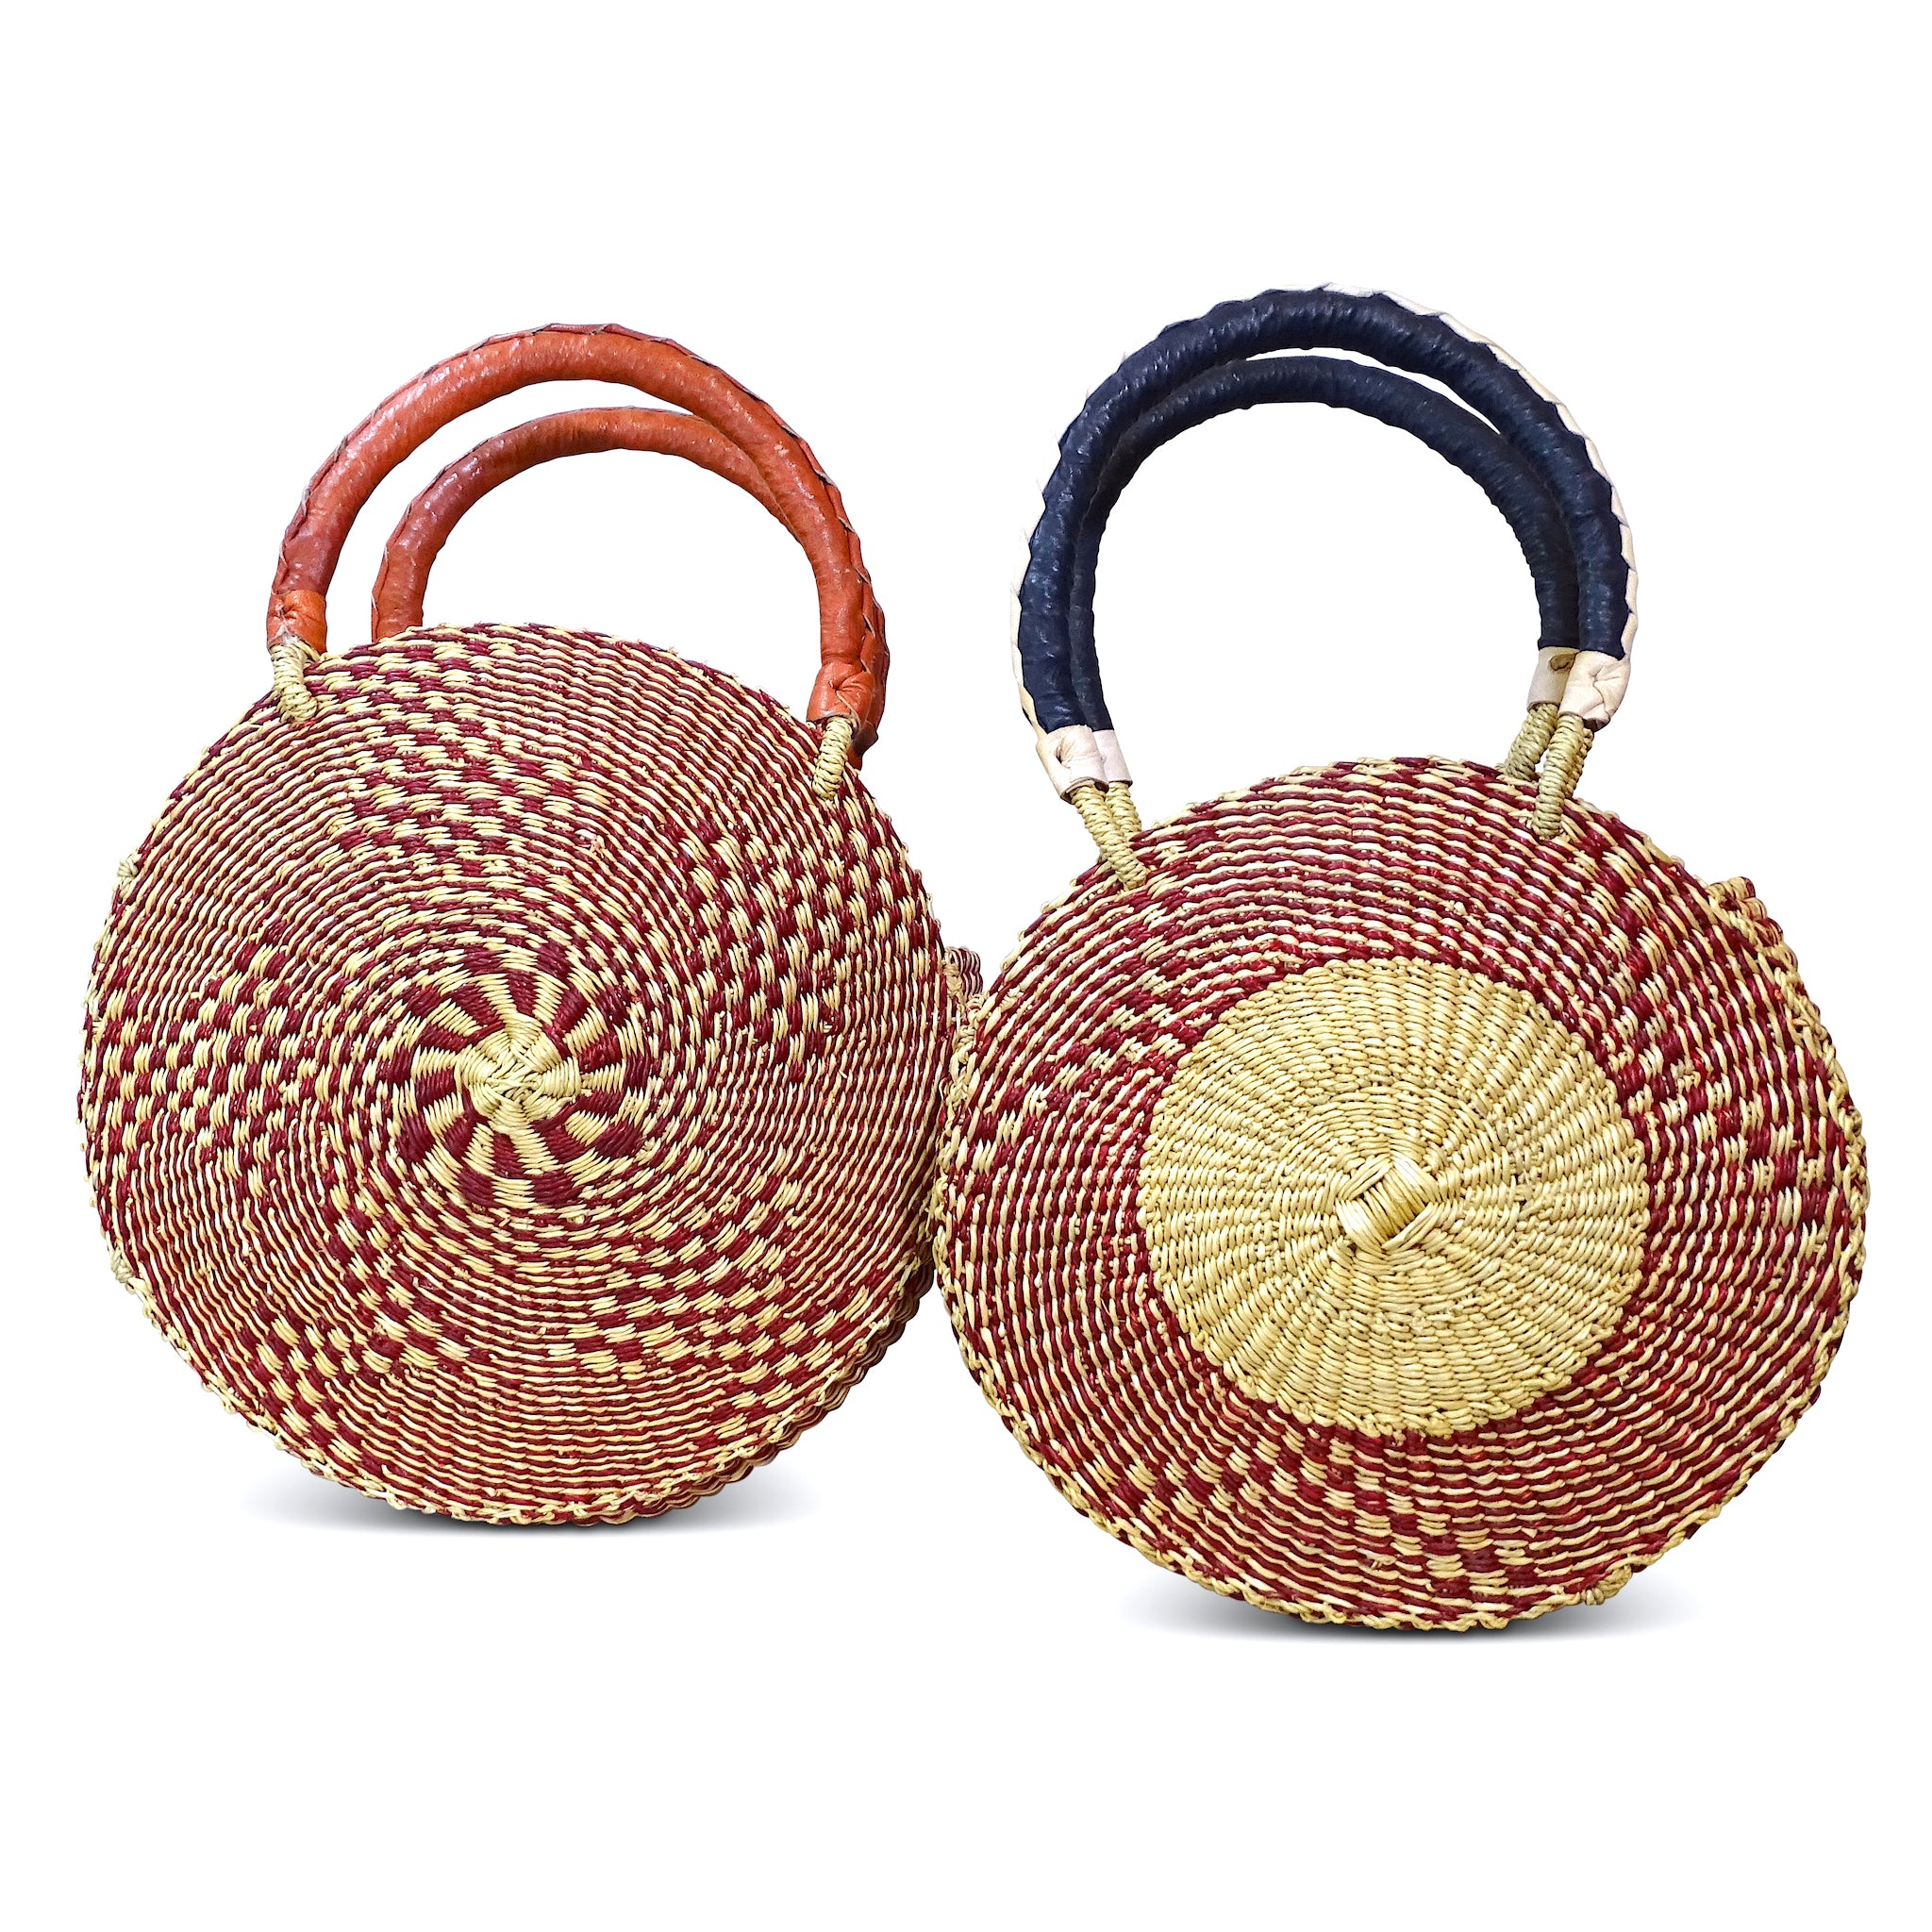 Buy Designer Handcrafted Straw Viking Purse | Saanjh Exclusive – Saanjh |  Craft for a fair future